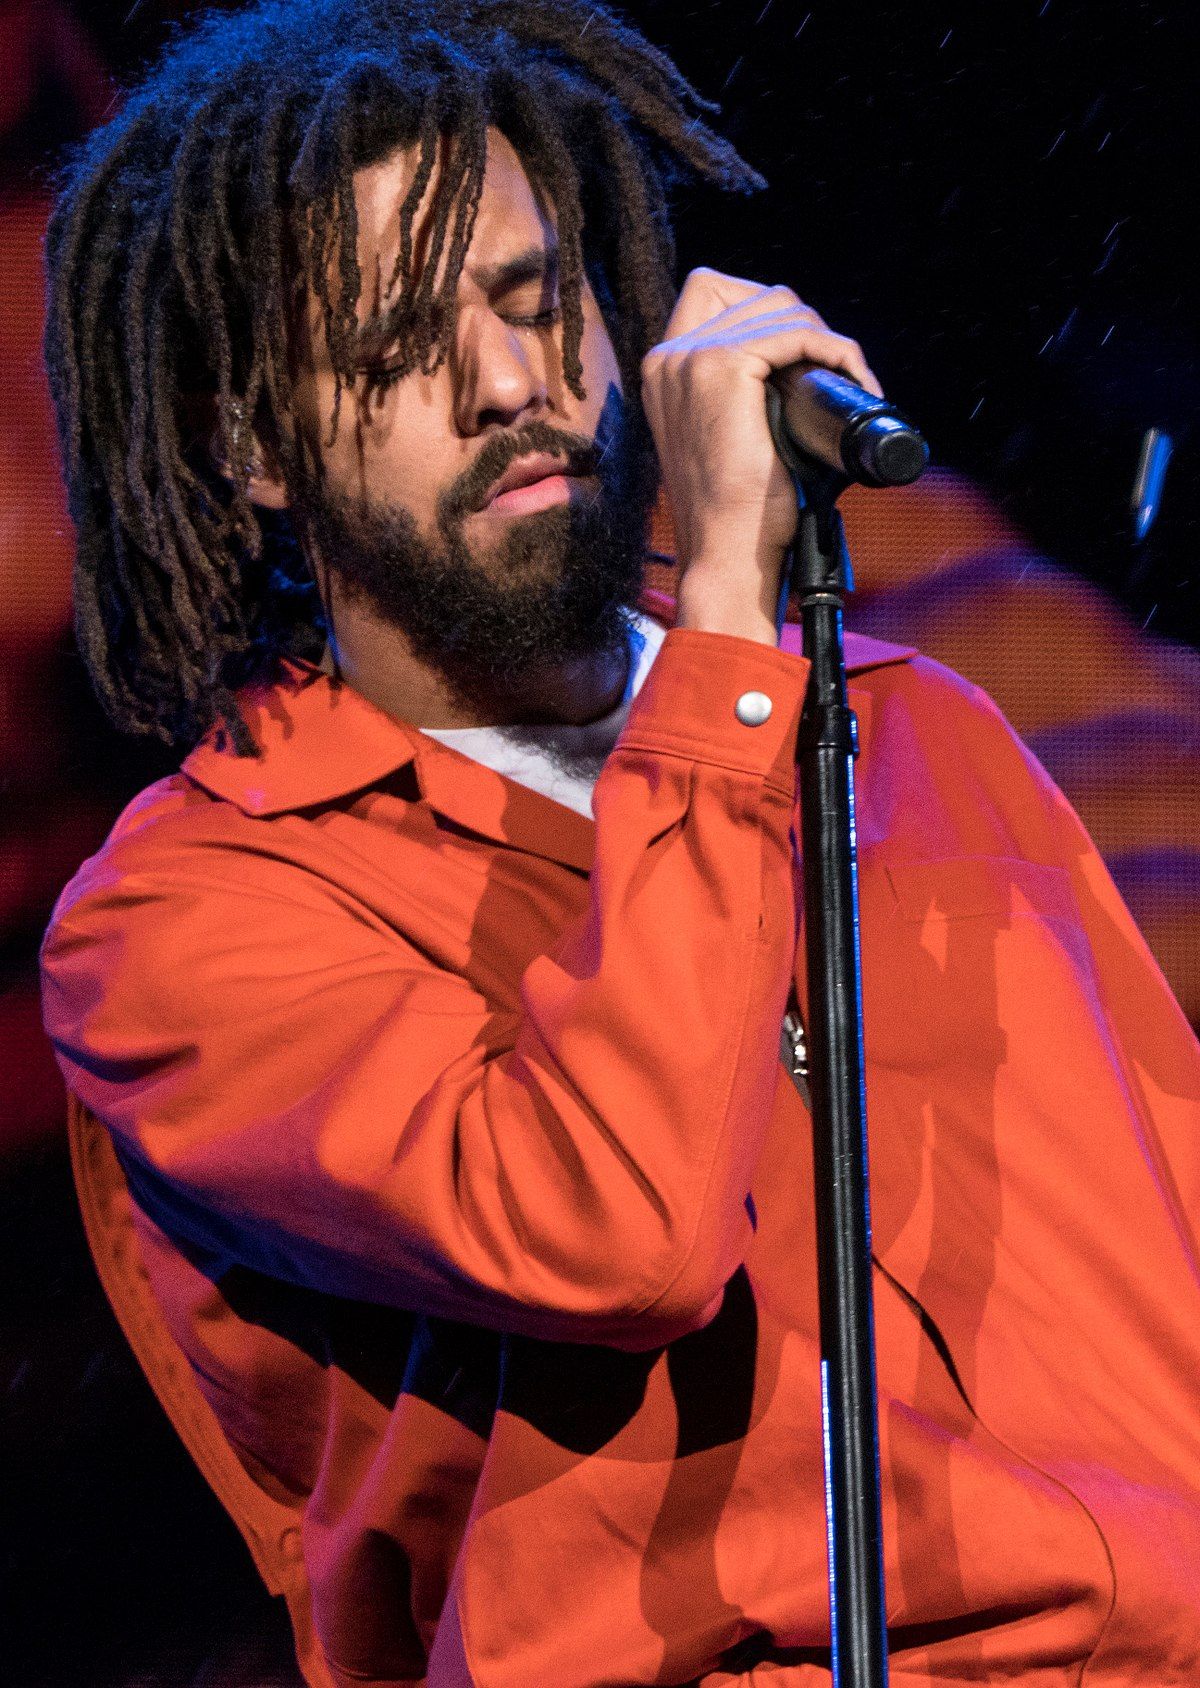 J. Cole Creates Strong Work on “KOD” But Sways From Message